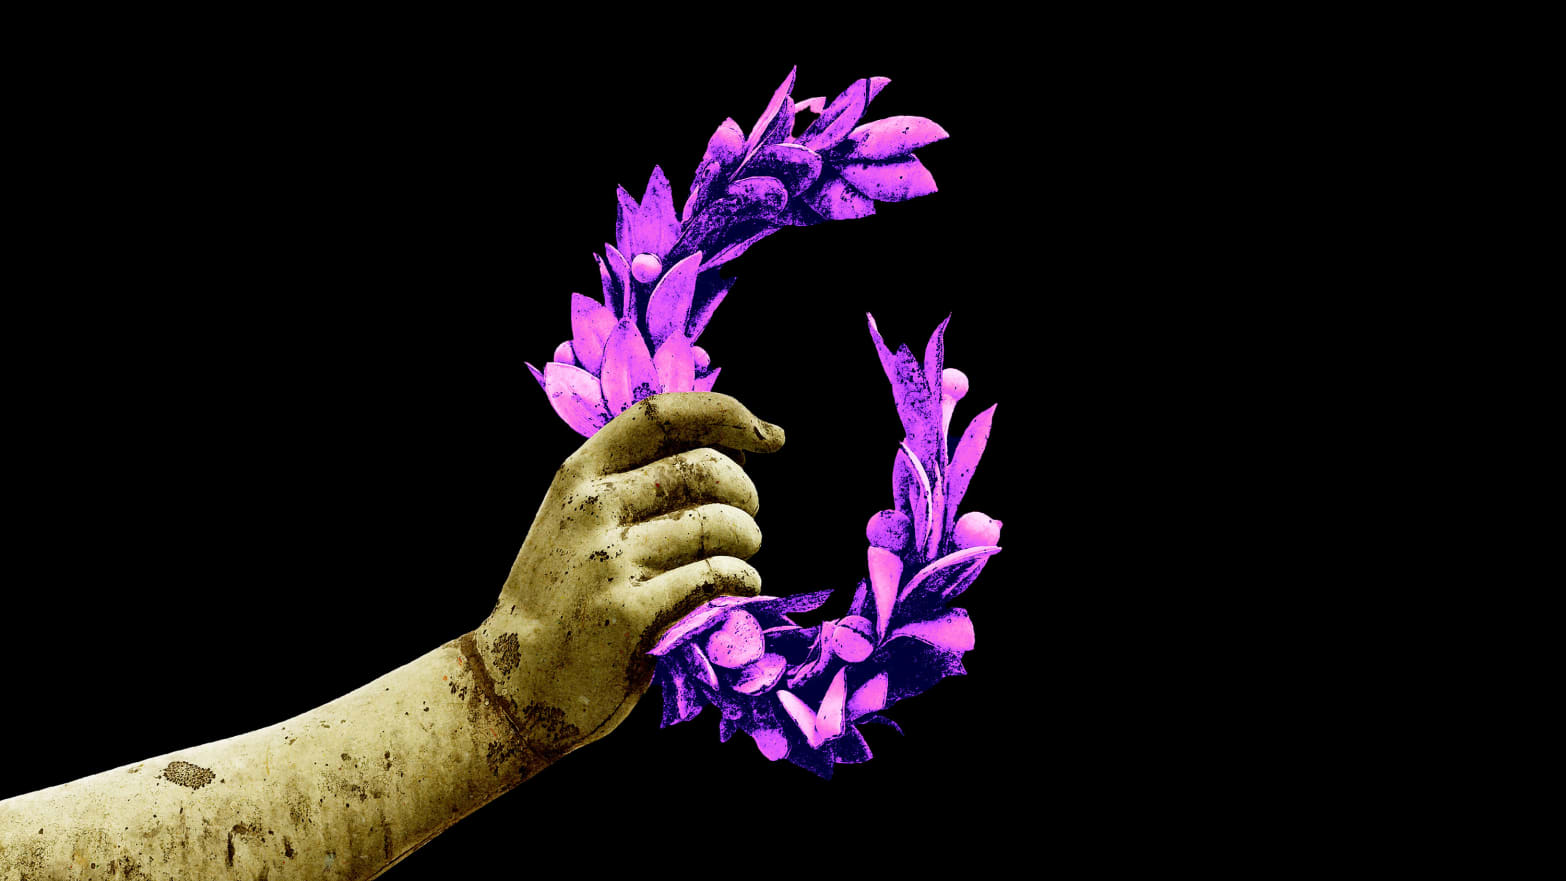 A photo illustration of the hand of a Greek statue clenching a pink laurel wreath 